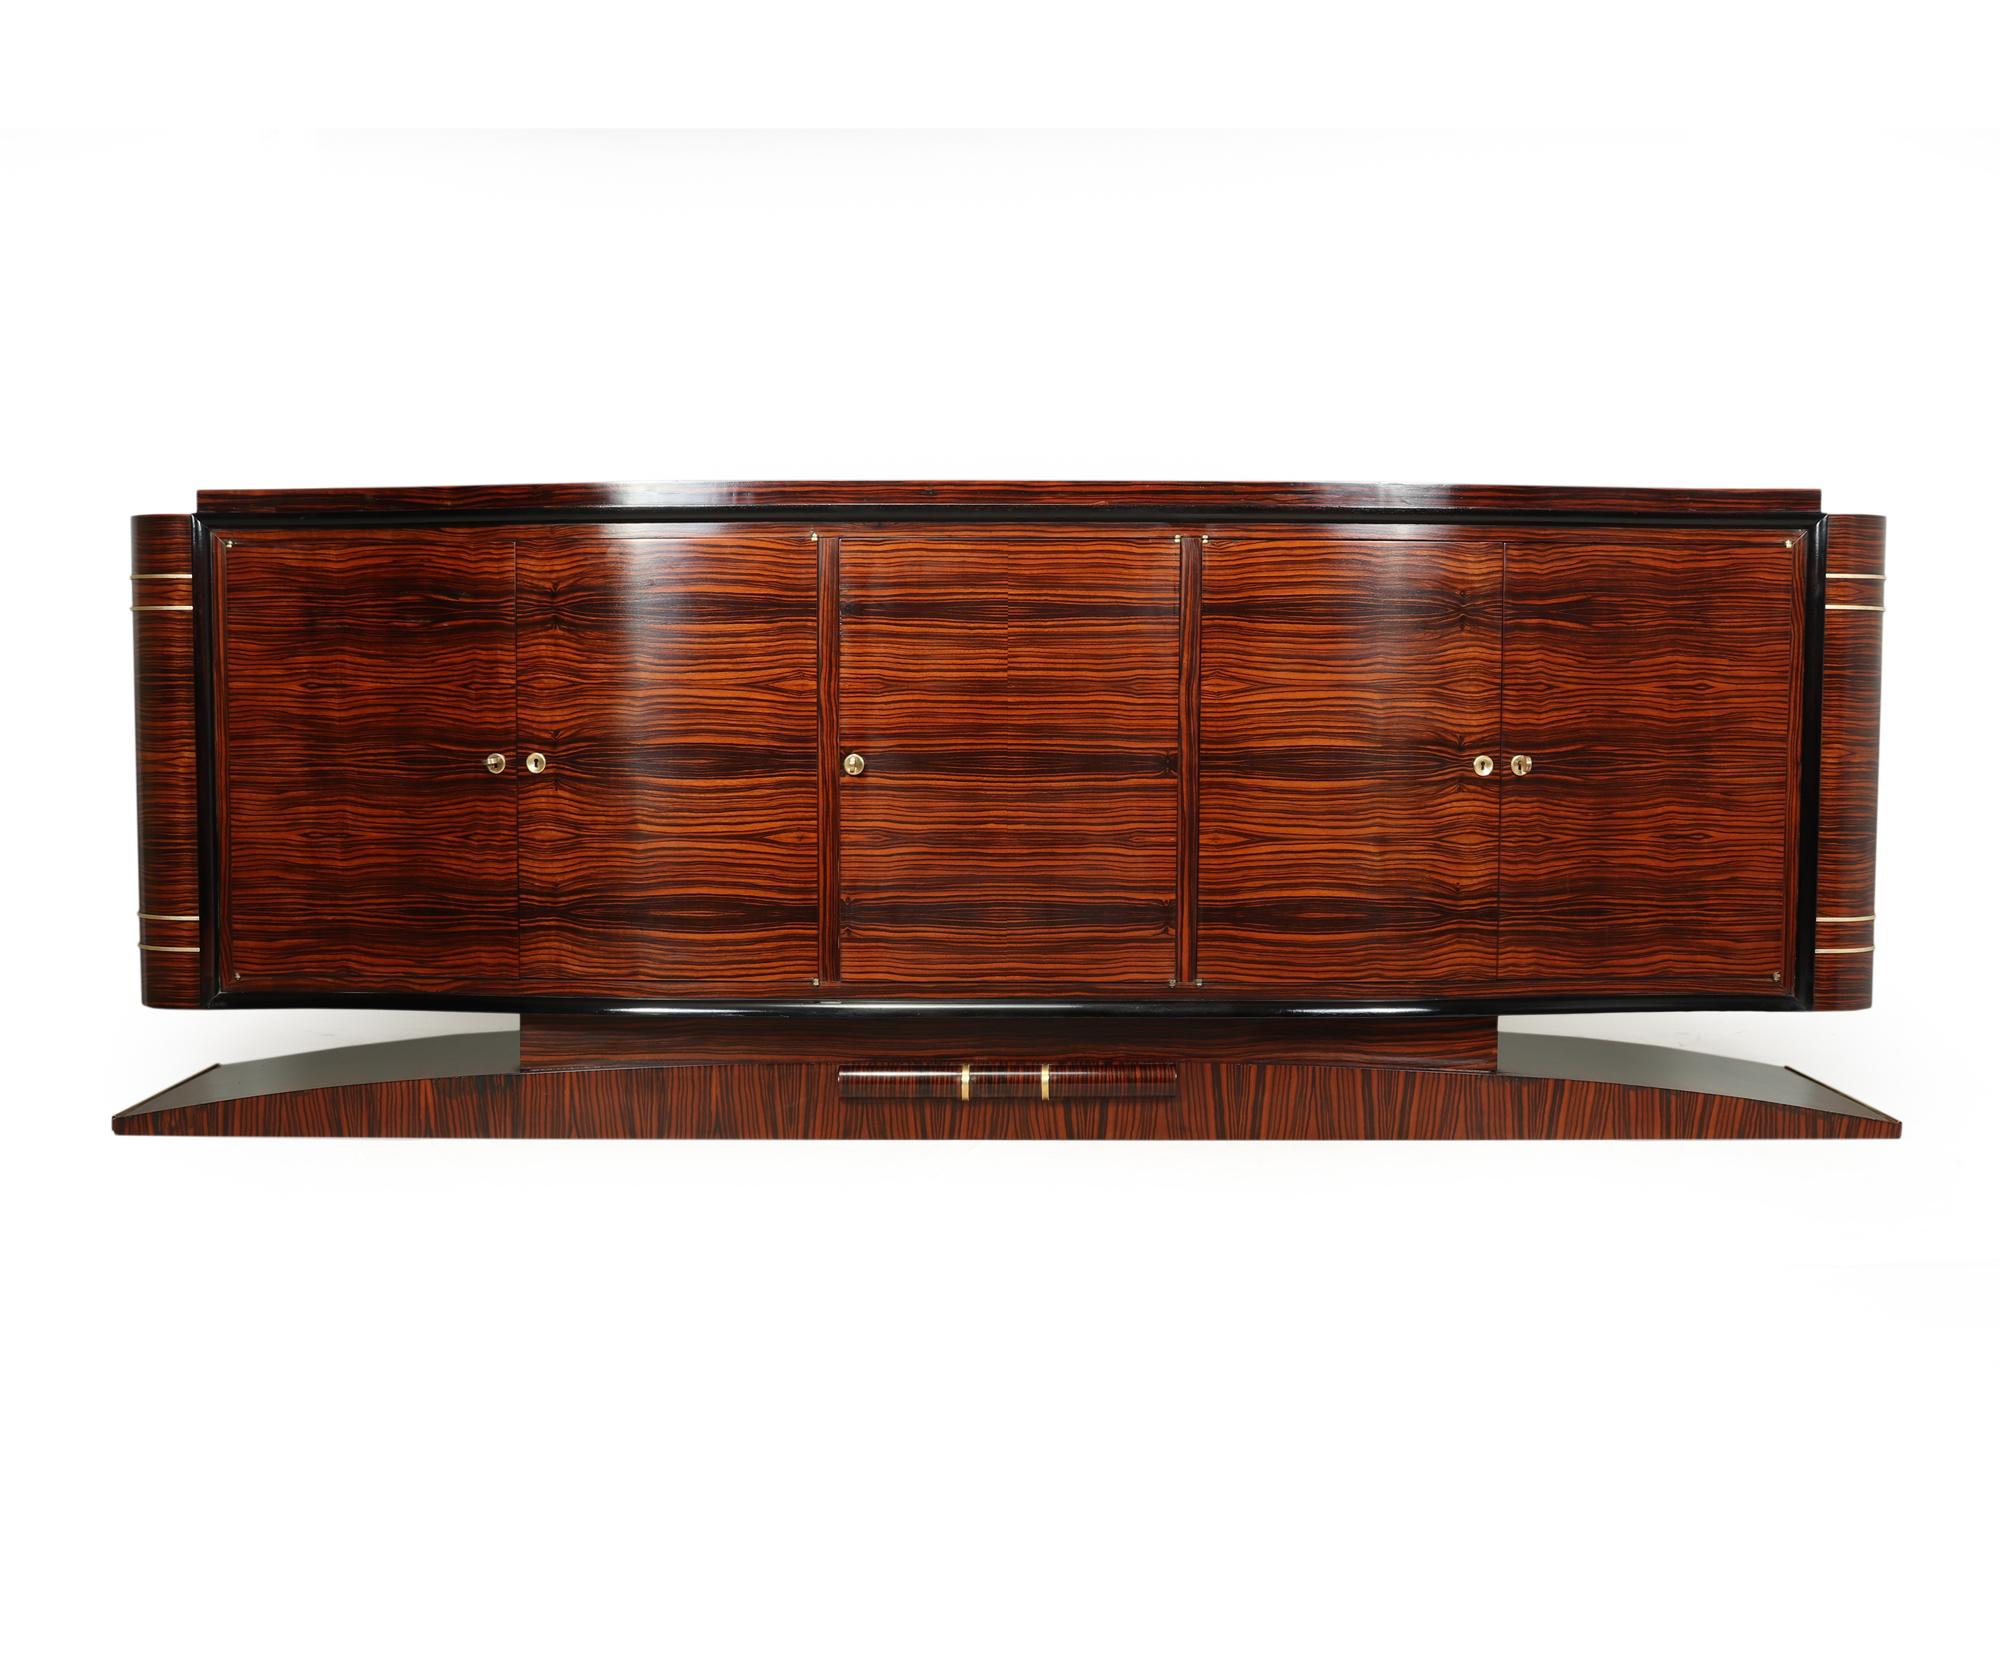 A very large Art Deco serpentine fronted sideboard produced in France in the 1930, it has fine grain Macassar ebony to the exterior and lined with blonde Chestnut to the interior, it has five doors the center has a drawer behind and a bottle shelf